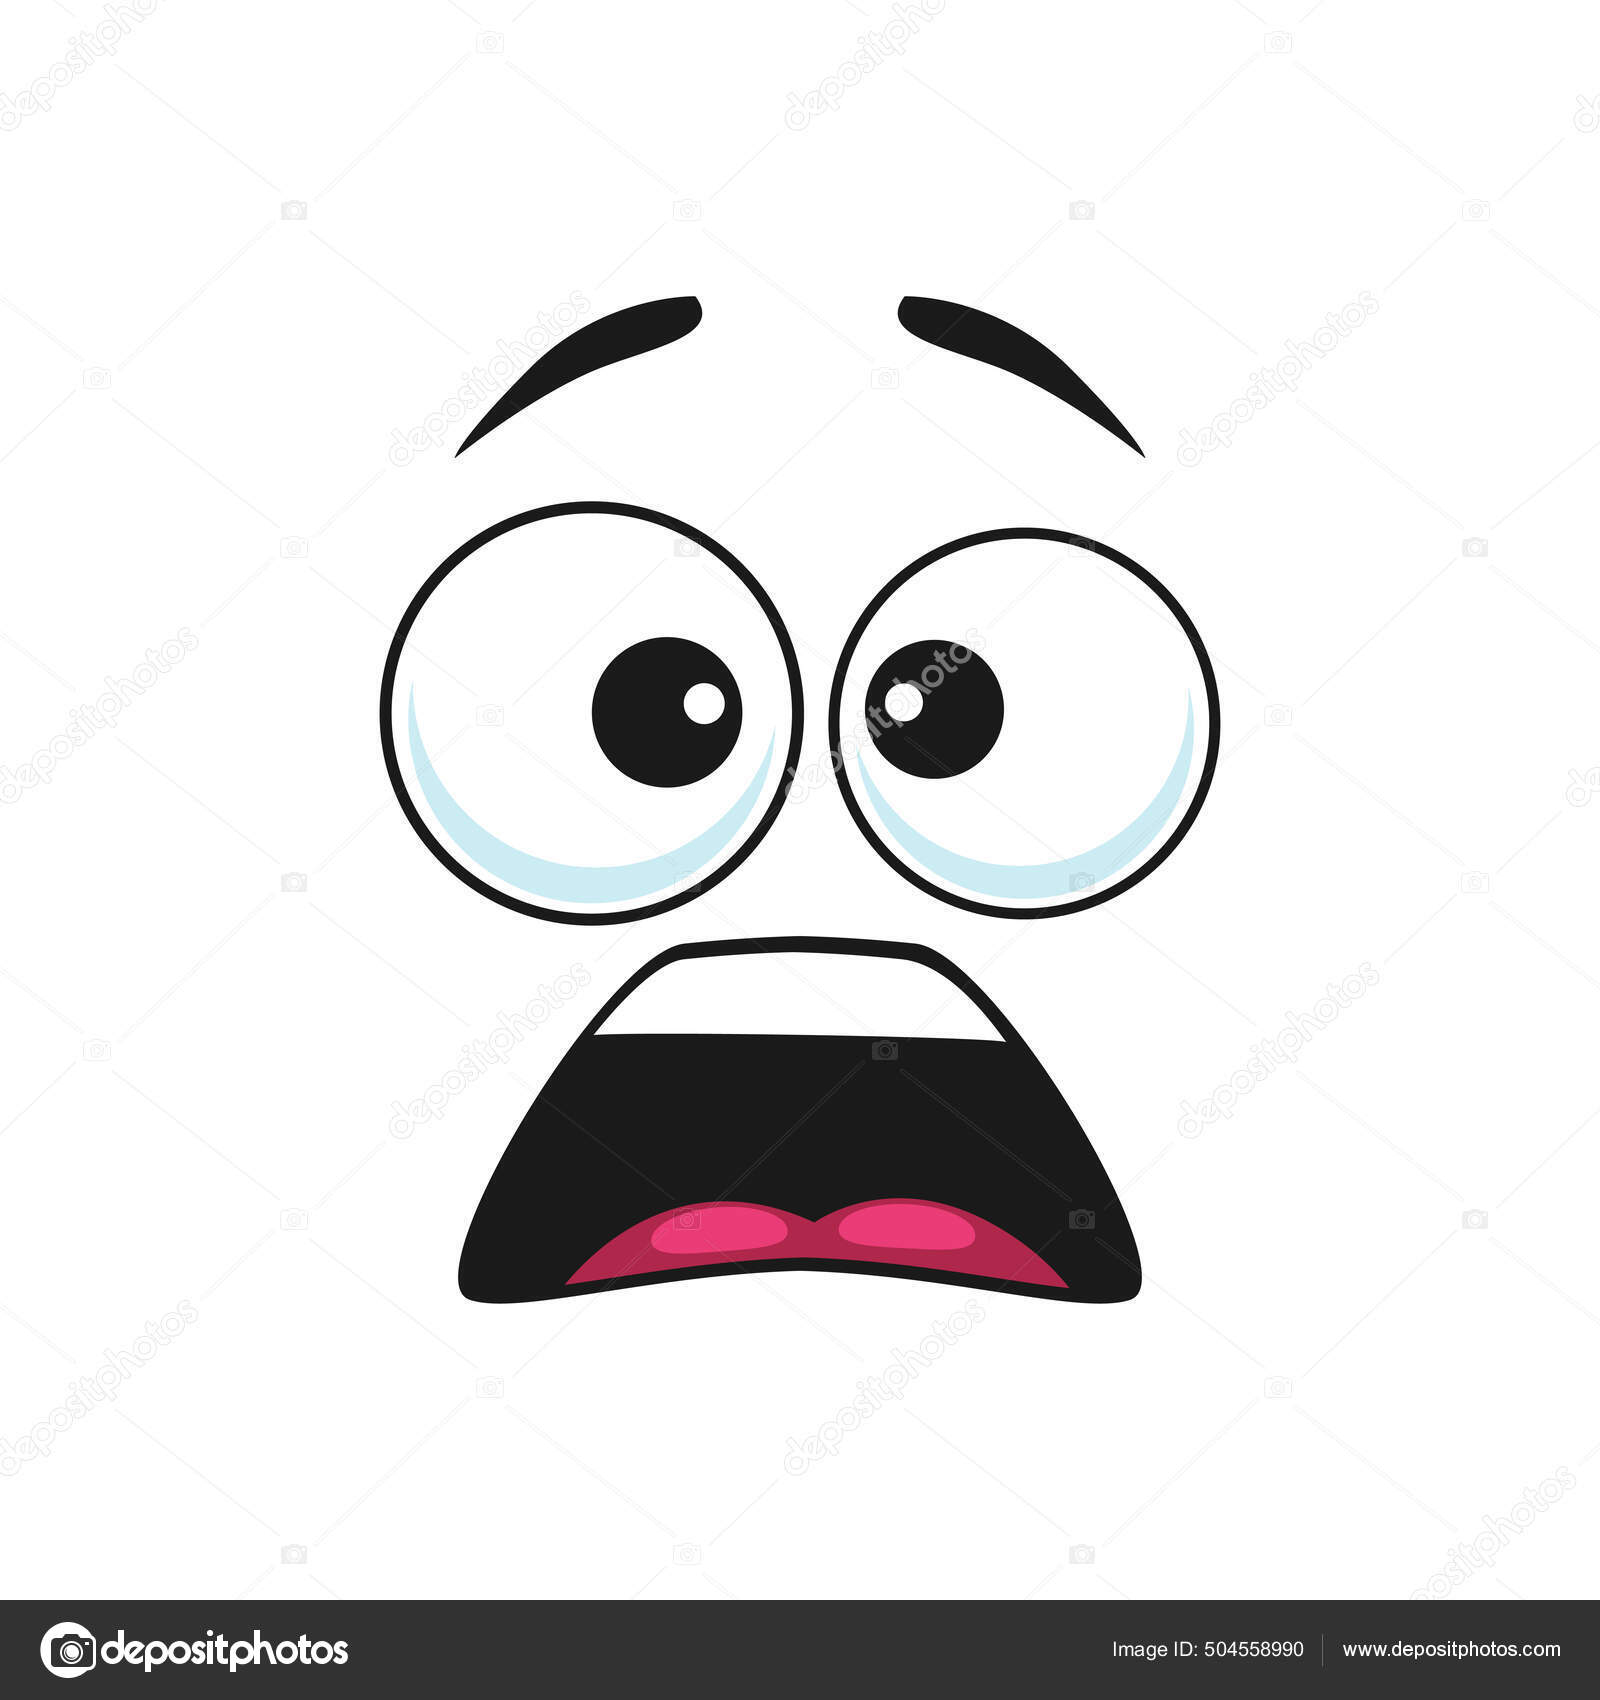 Black And White Scared Cartoon Funny Face With Panic Expression